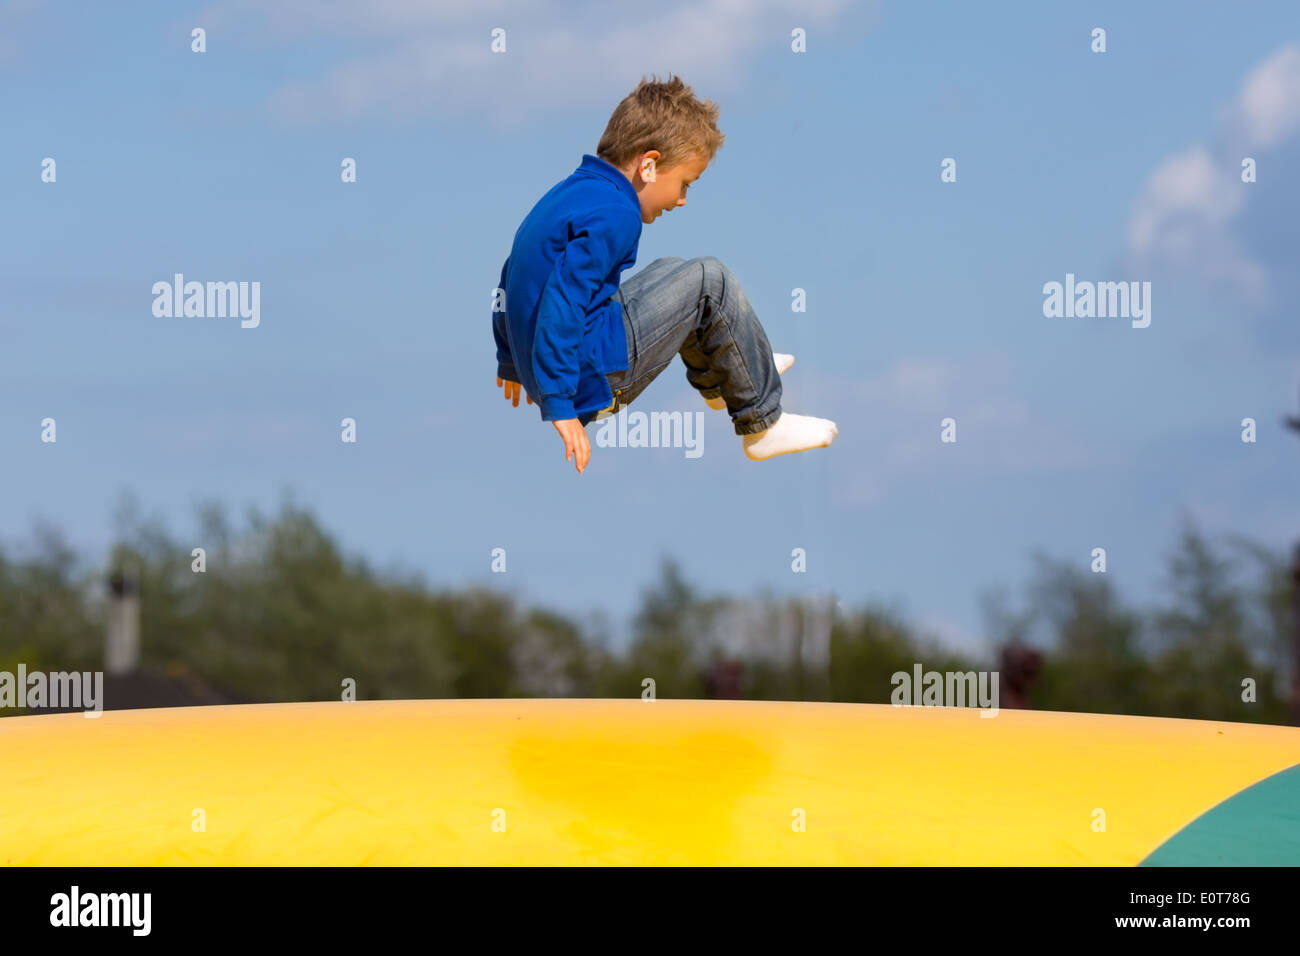 Boy jumping up and down on bouncy pad. Trademarks have been removed. Stock Photo